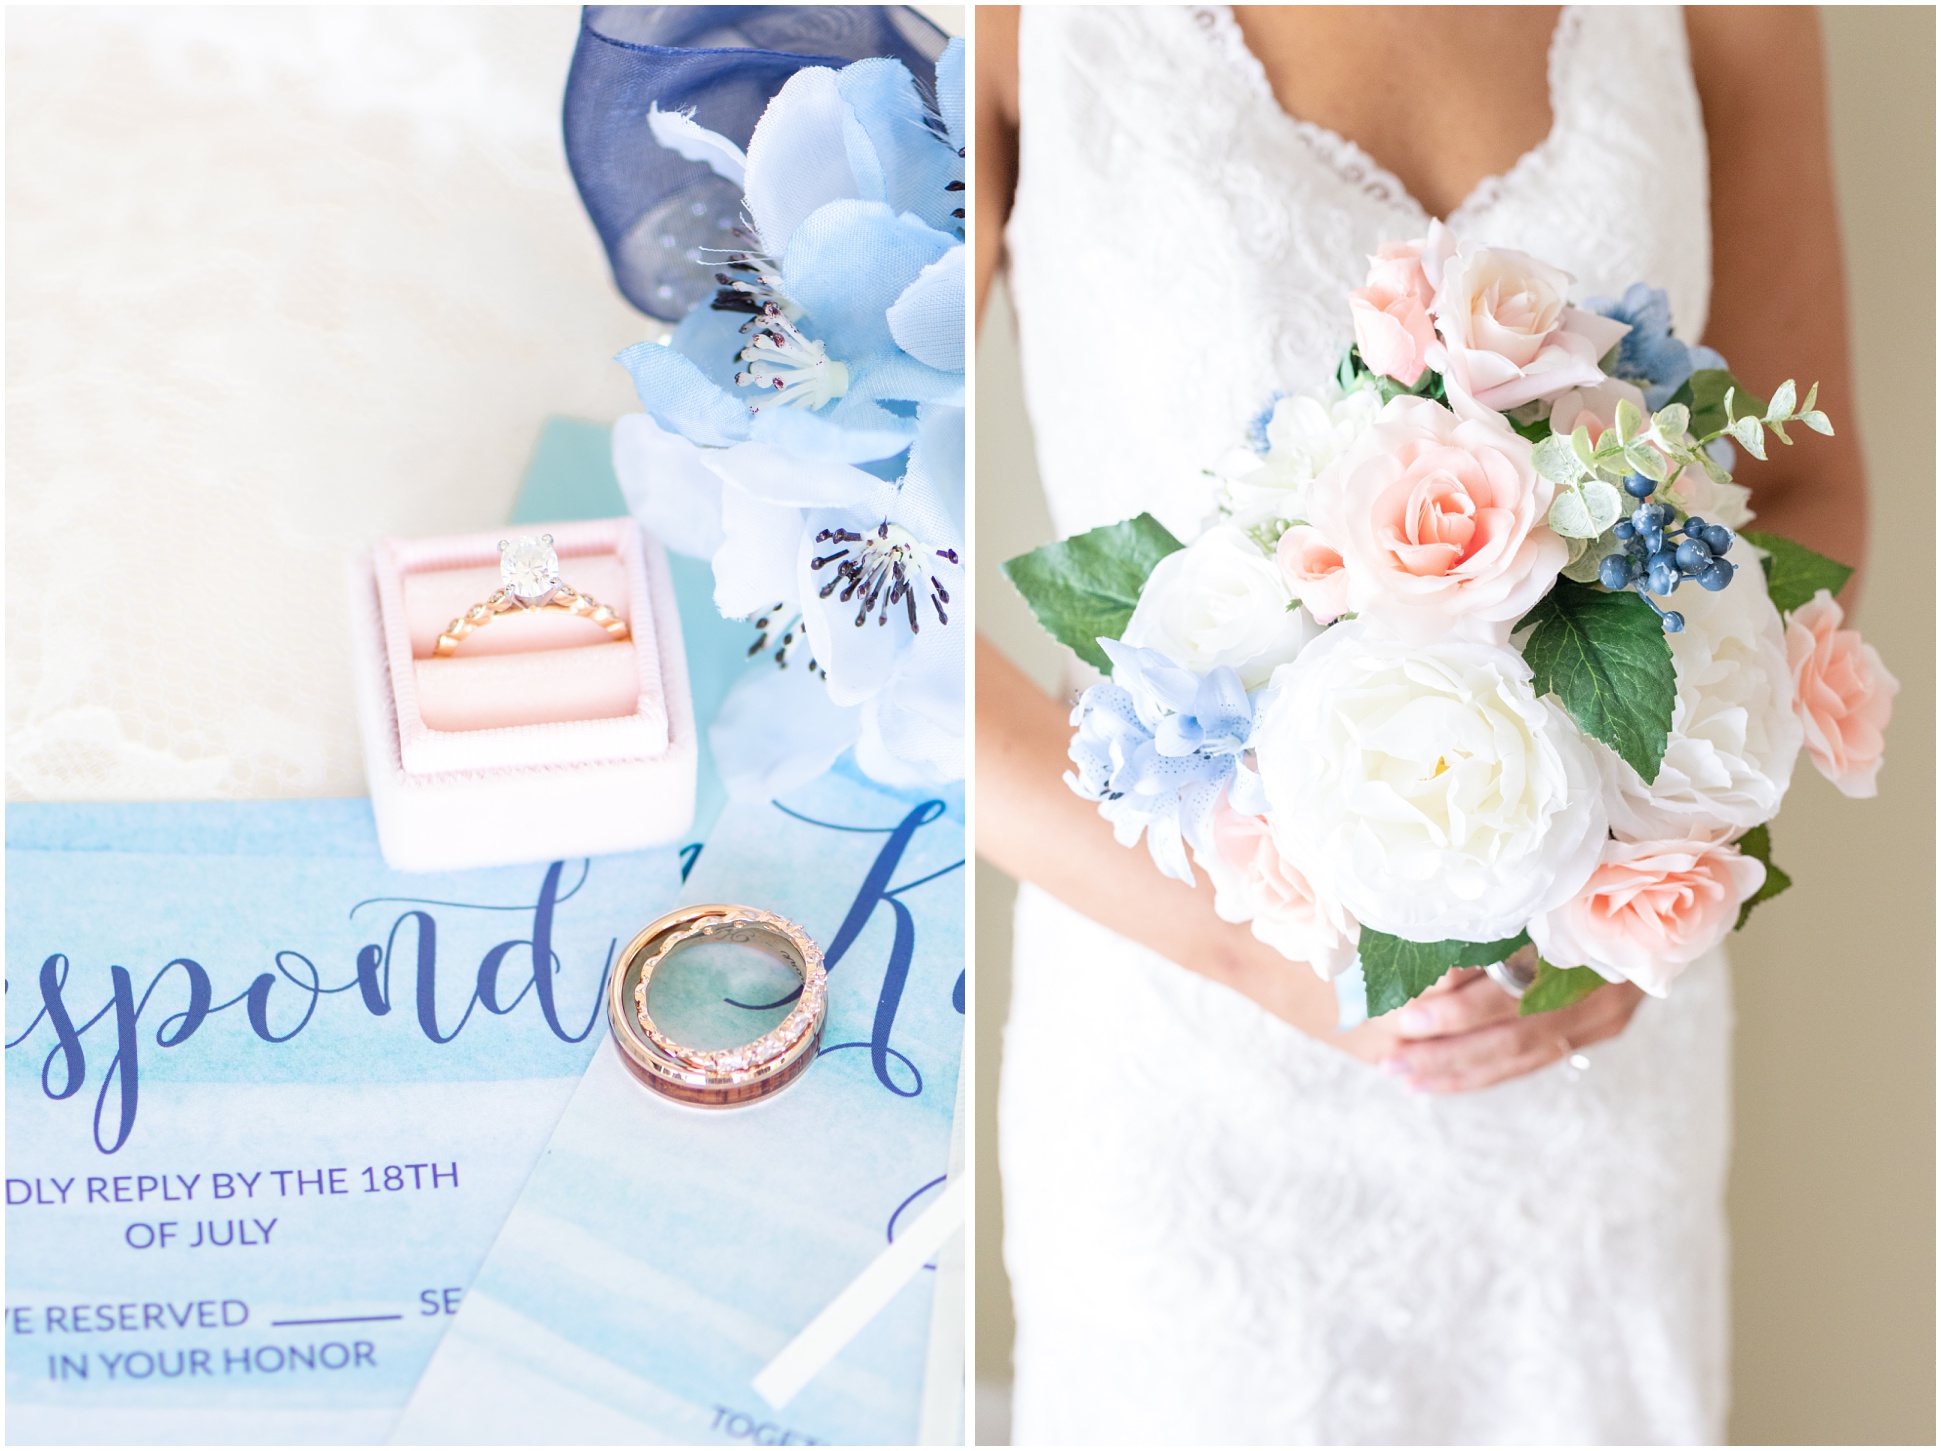 Left Image: close up shot of the rings; Right Image: close up shot of the brides diy bouquet